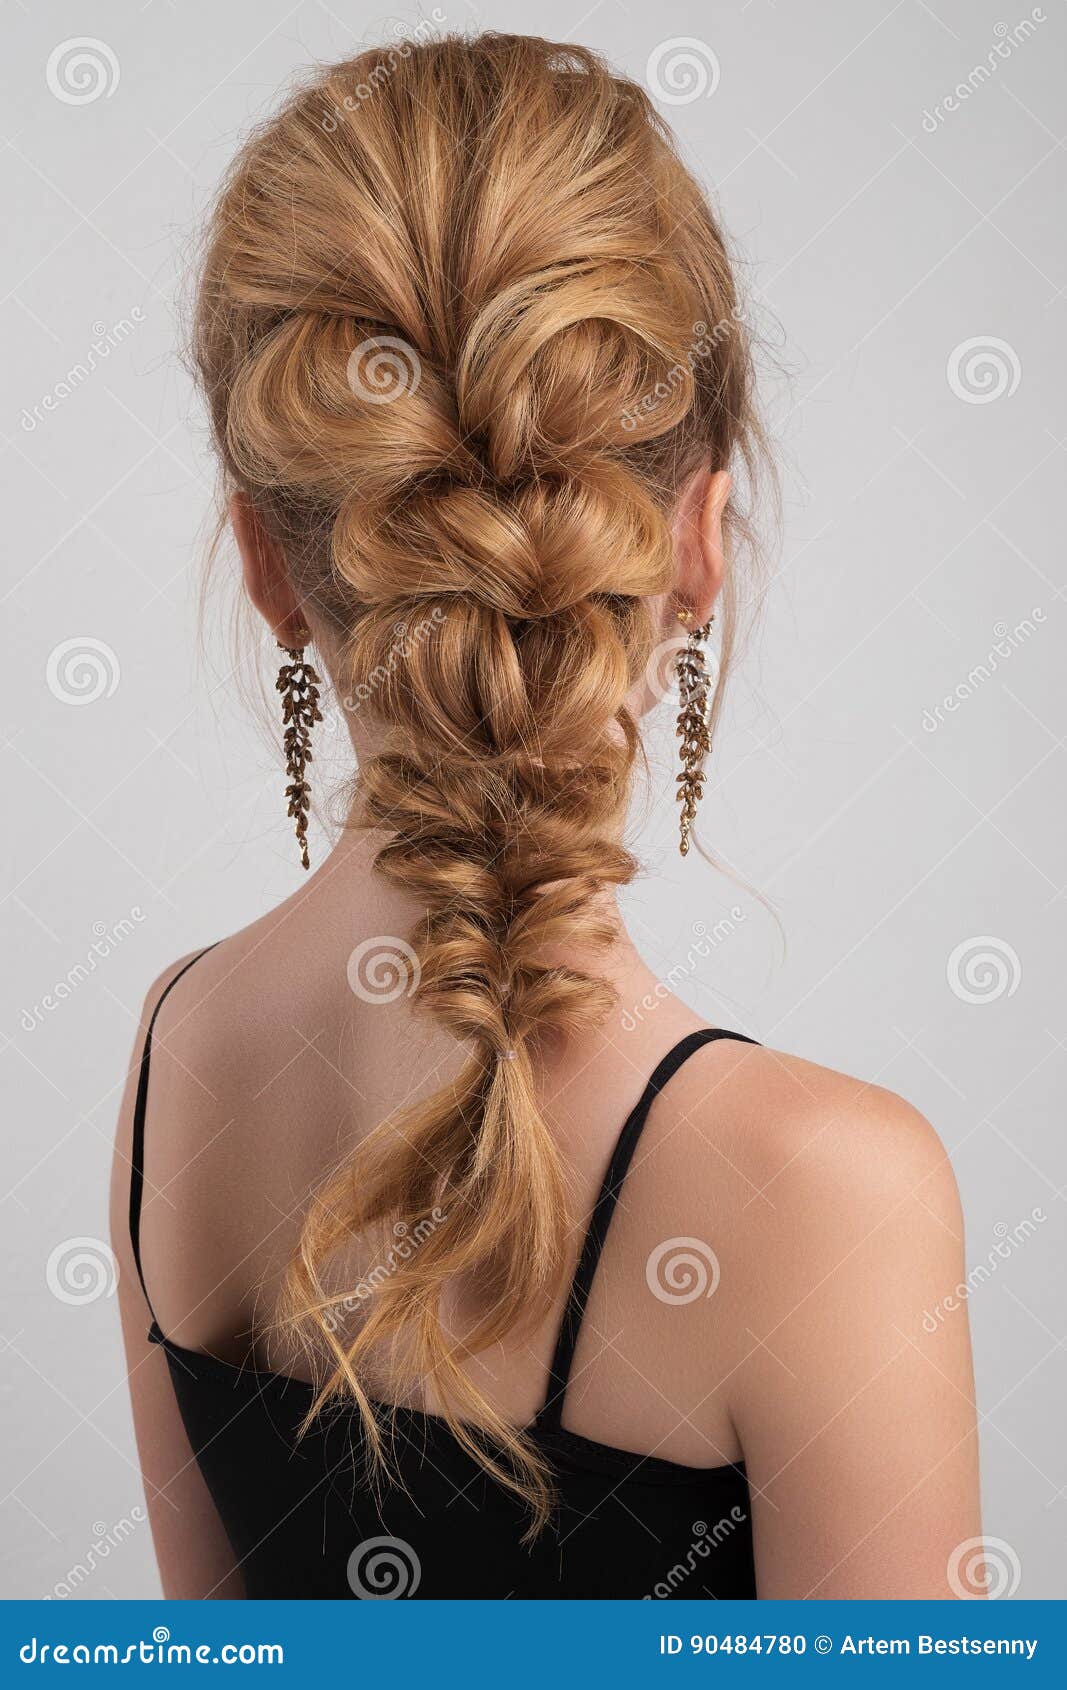 3 Back To School Hairstyles  Hairstyles For Girls  Princess Hairstyles